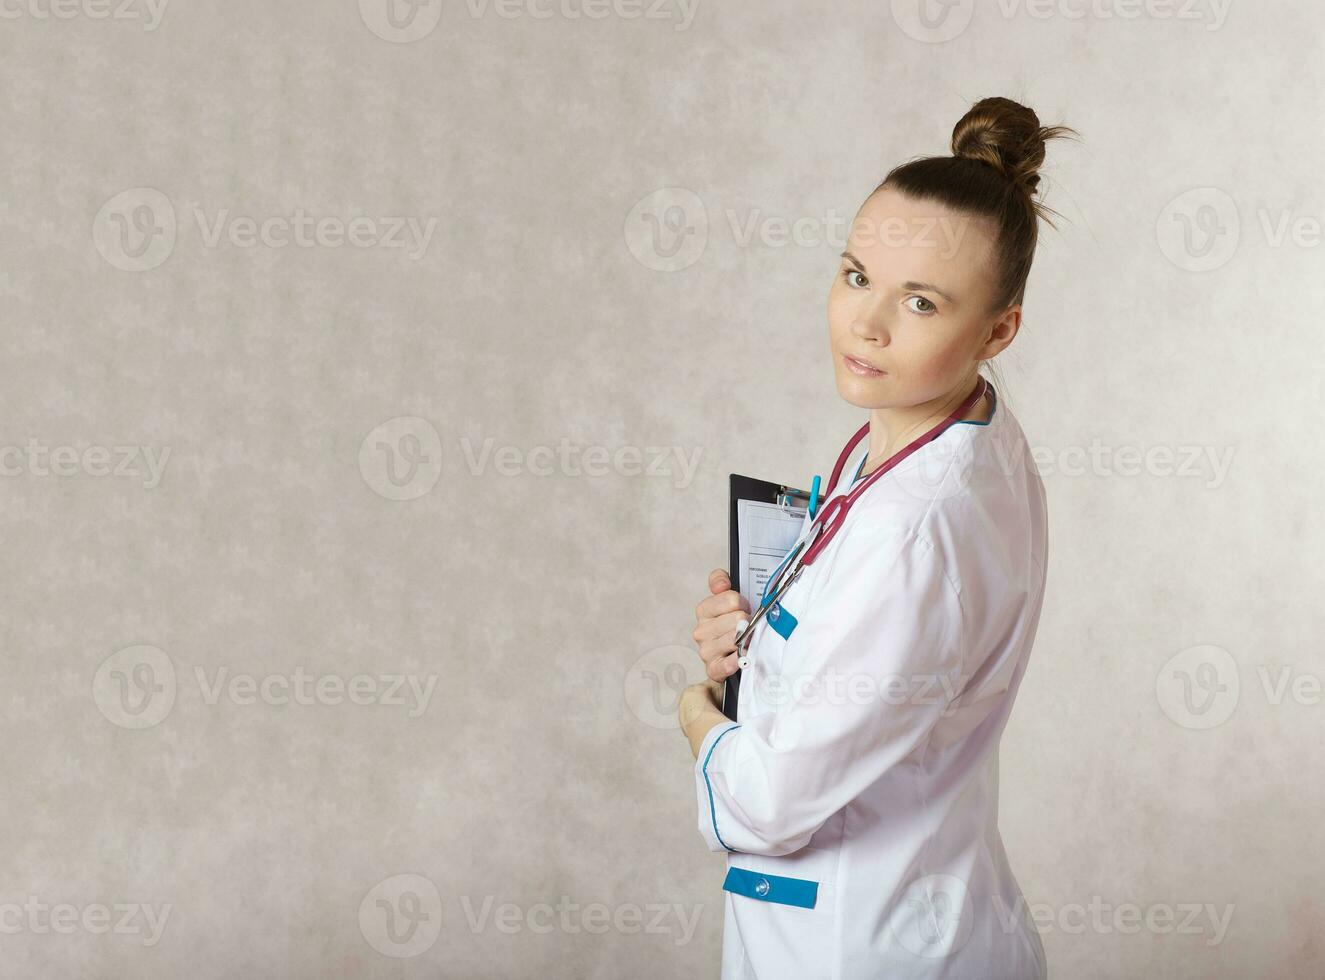 Young female doctor dressed in a white medical uniform photo